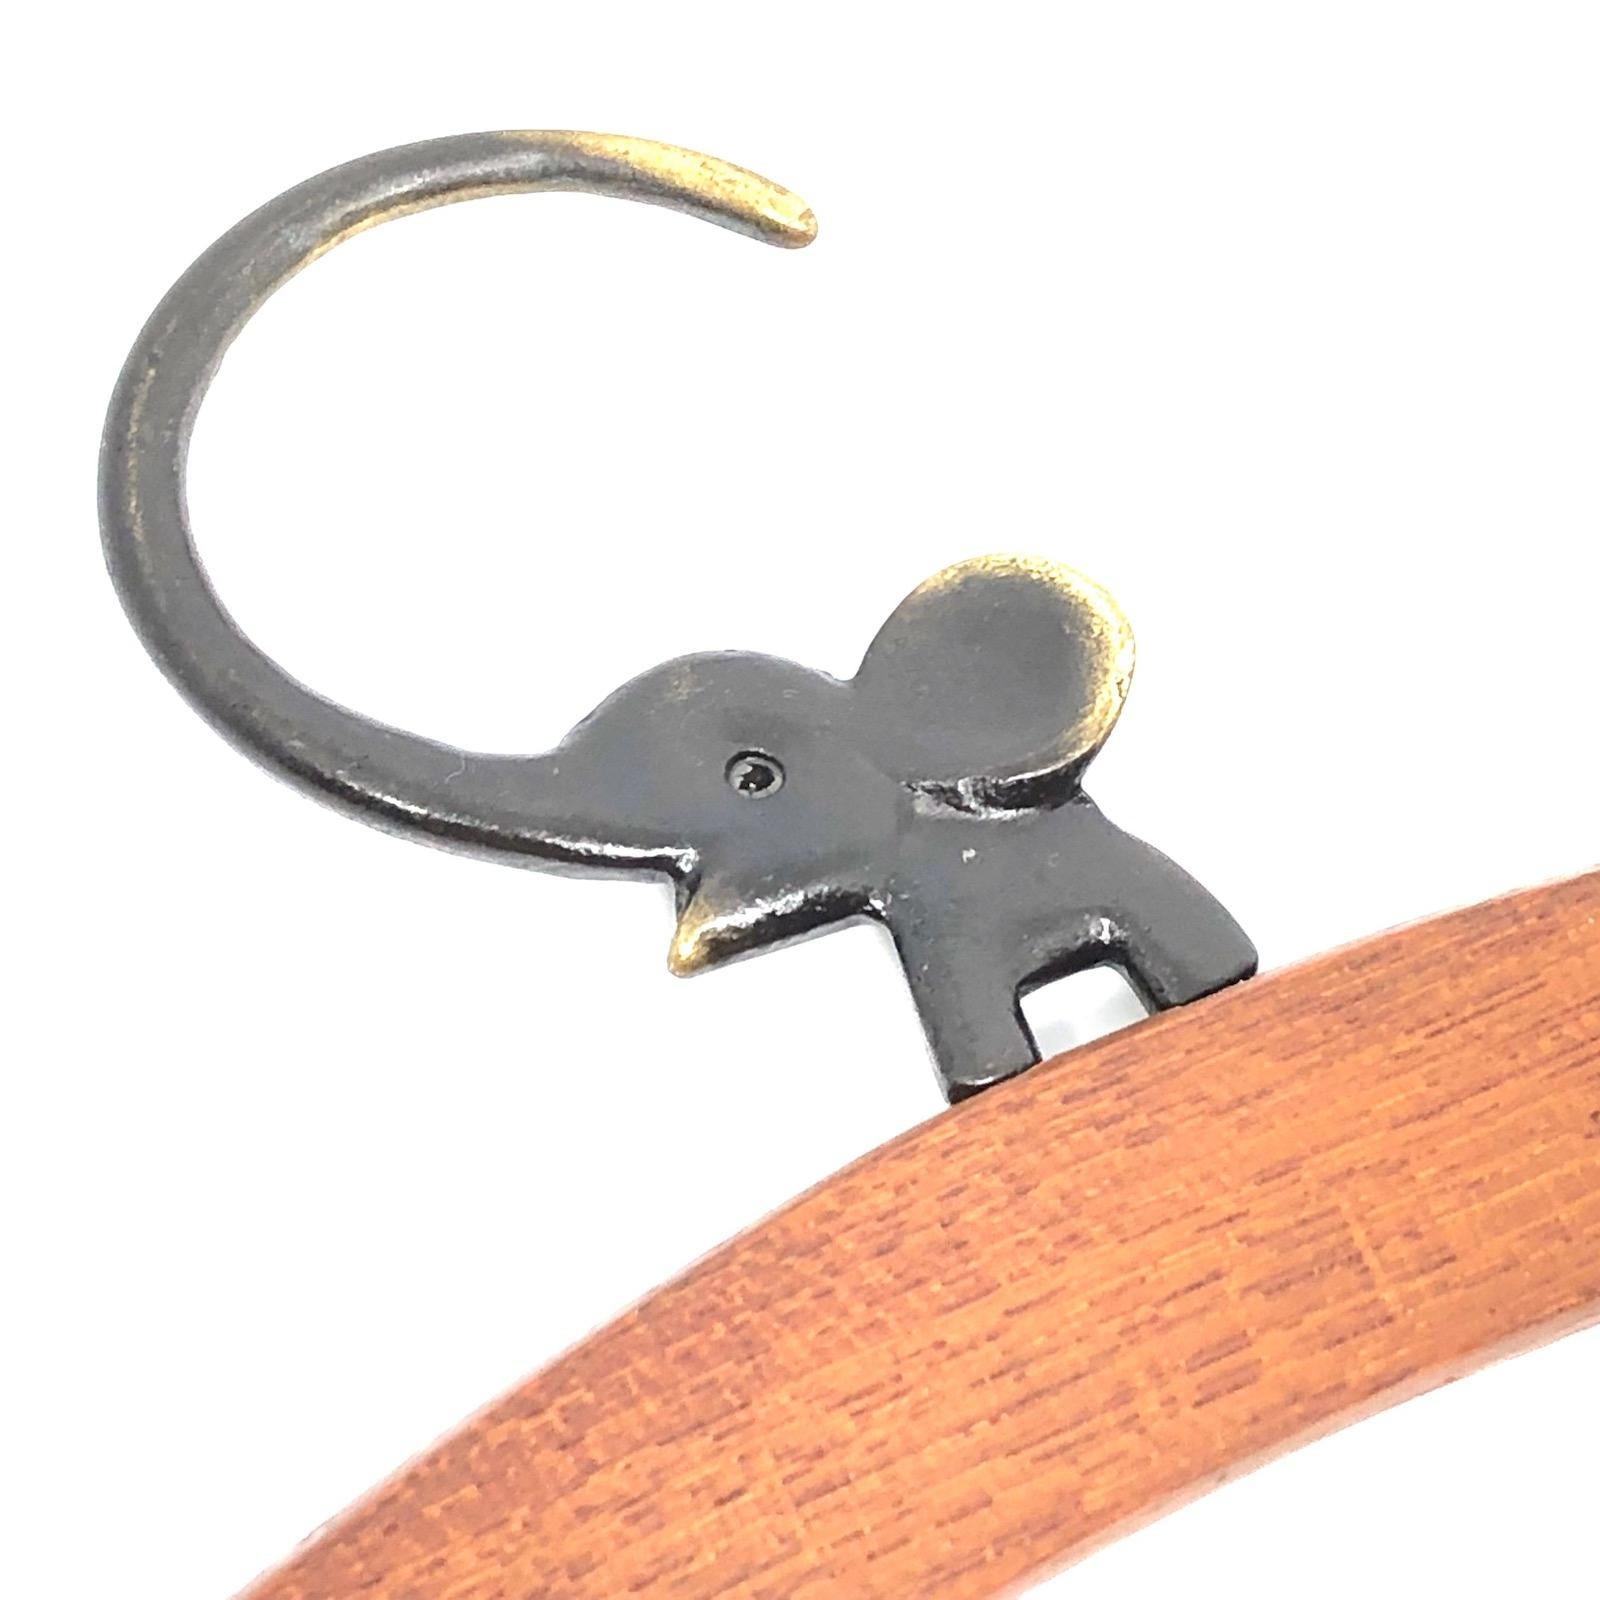 Classic early 1950s Austrian Walter Bosse coat hanger in the form of a elephant. Nice addition to your room or just for your collection of Austrian bronze items. Found at an estate sale in Vienna, Austria. Made of teak wood and bronze (metal).